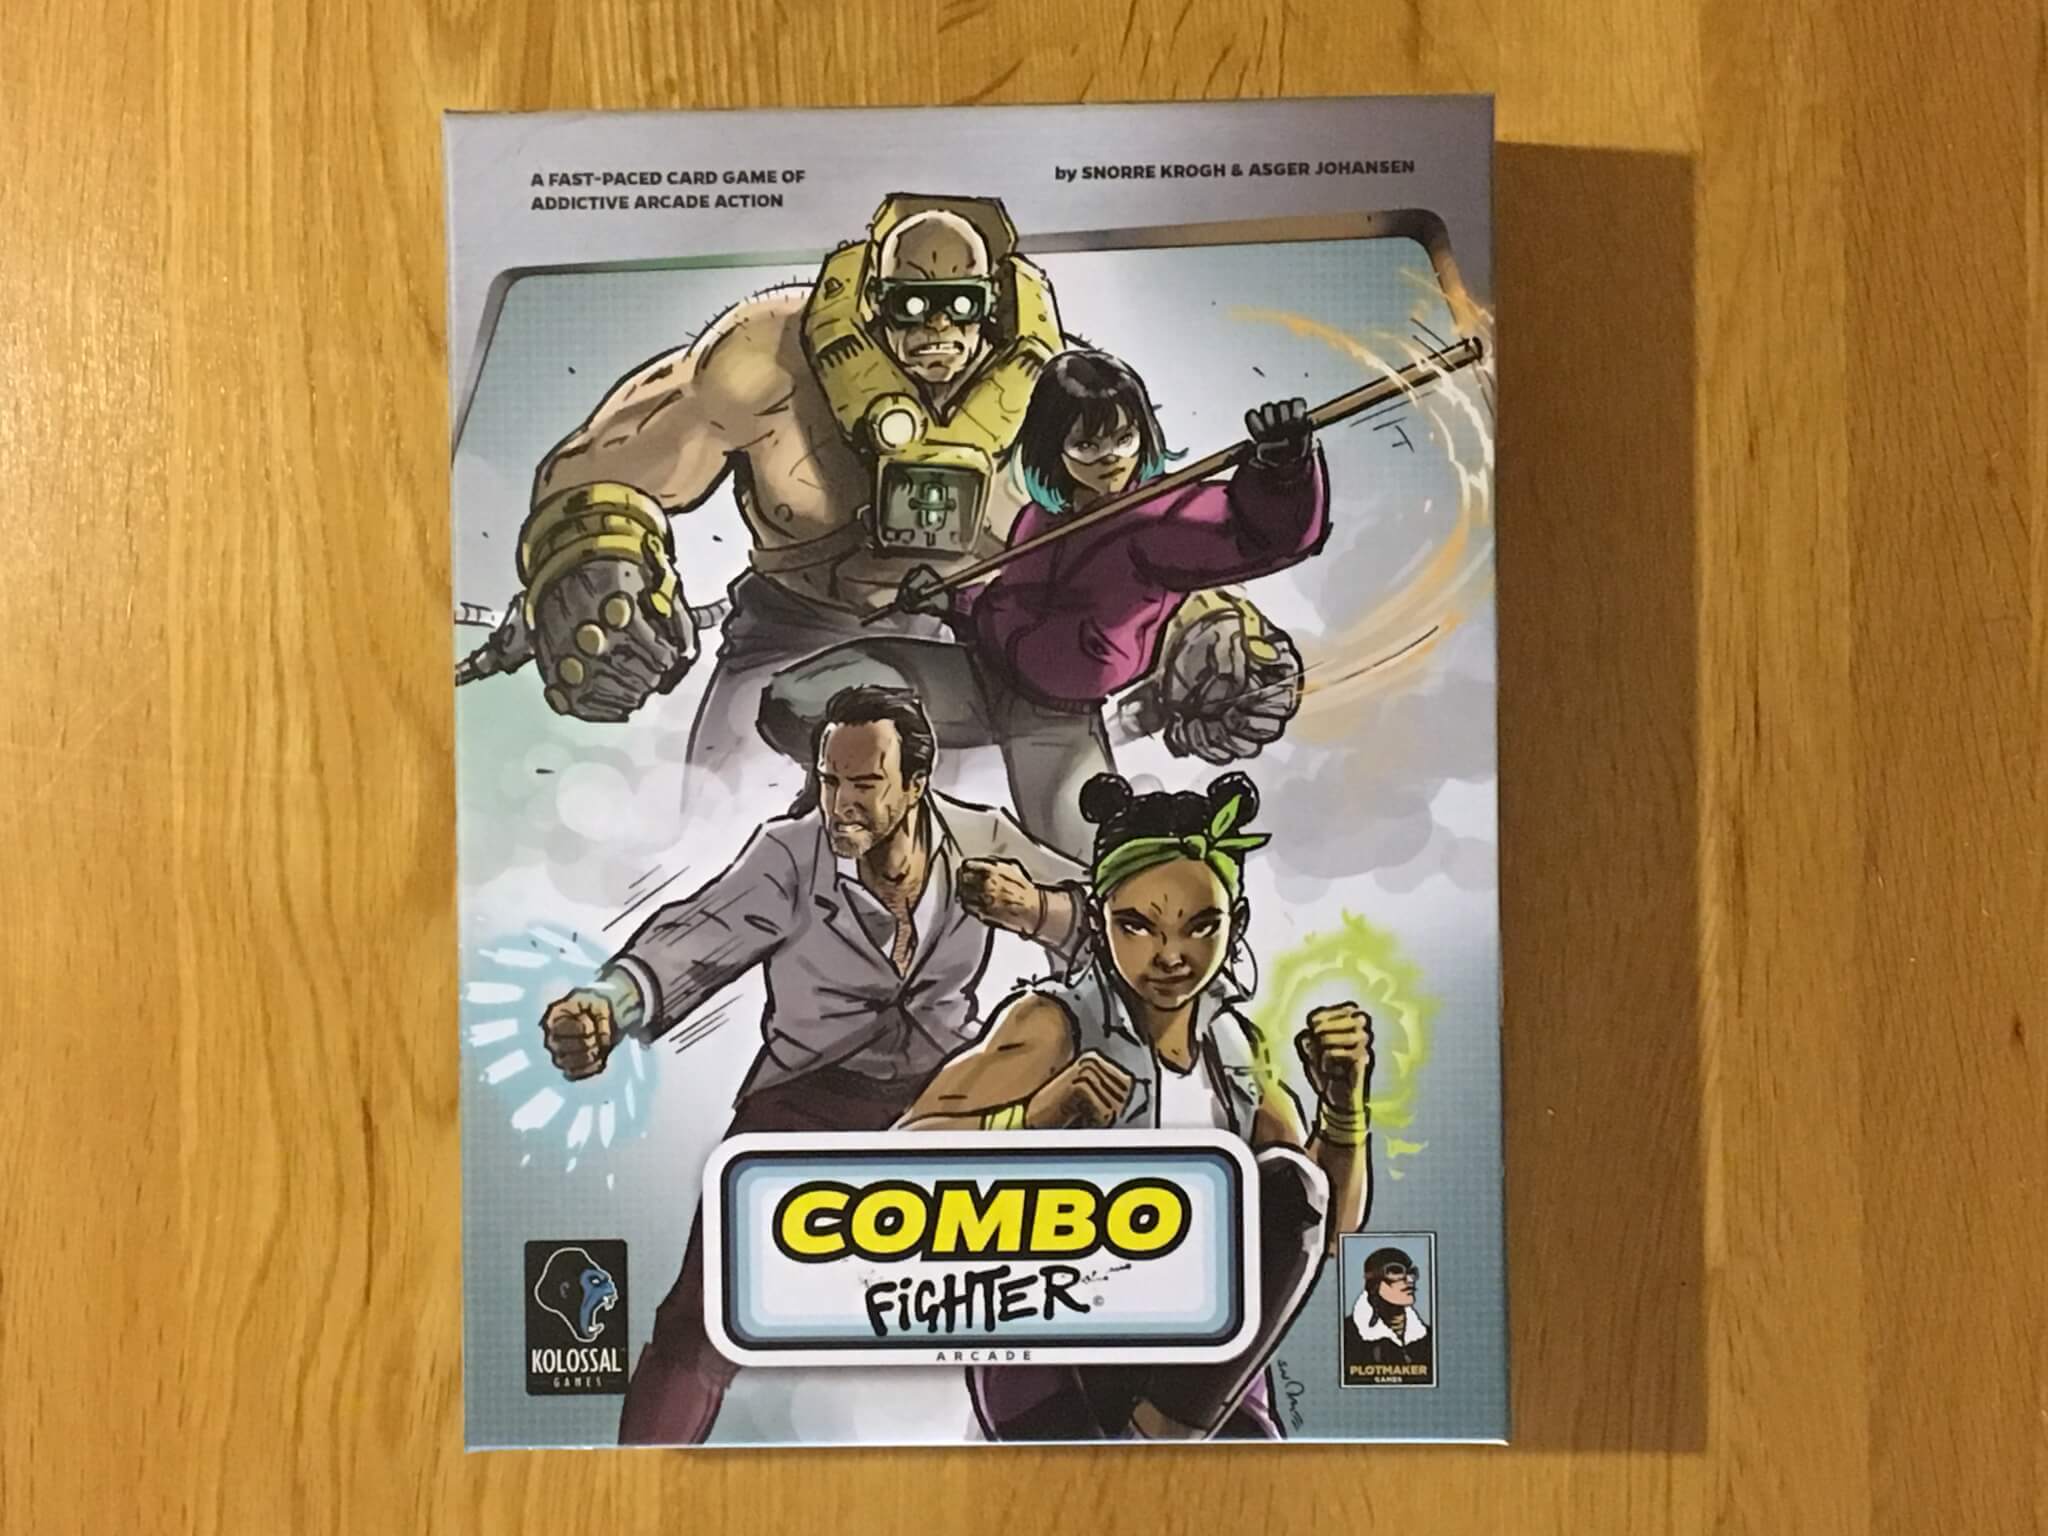 New In Shrink Kolossal Games Best 2-4 Player Combo Fighter Core Card Game